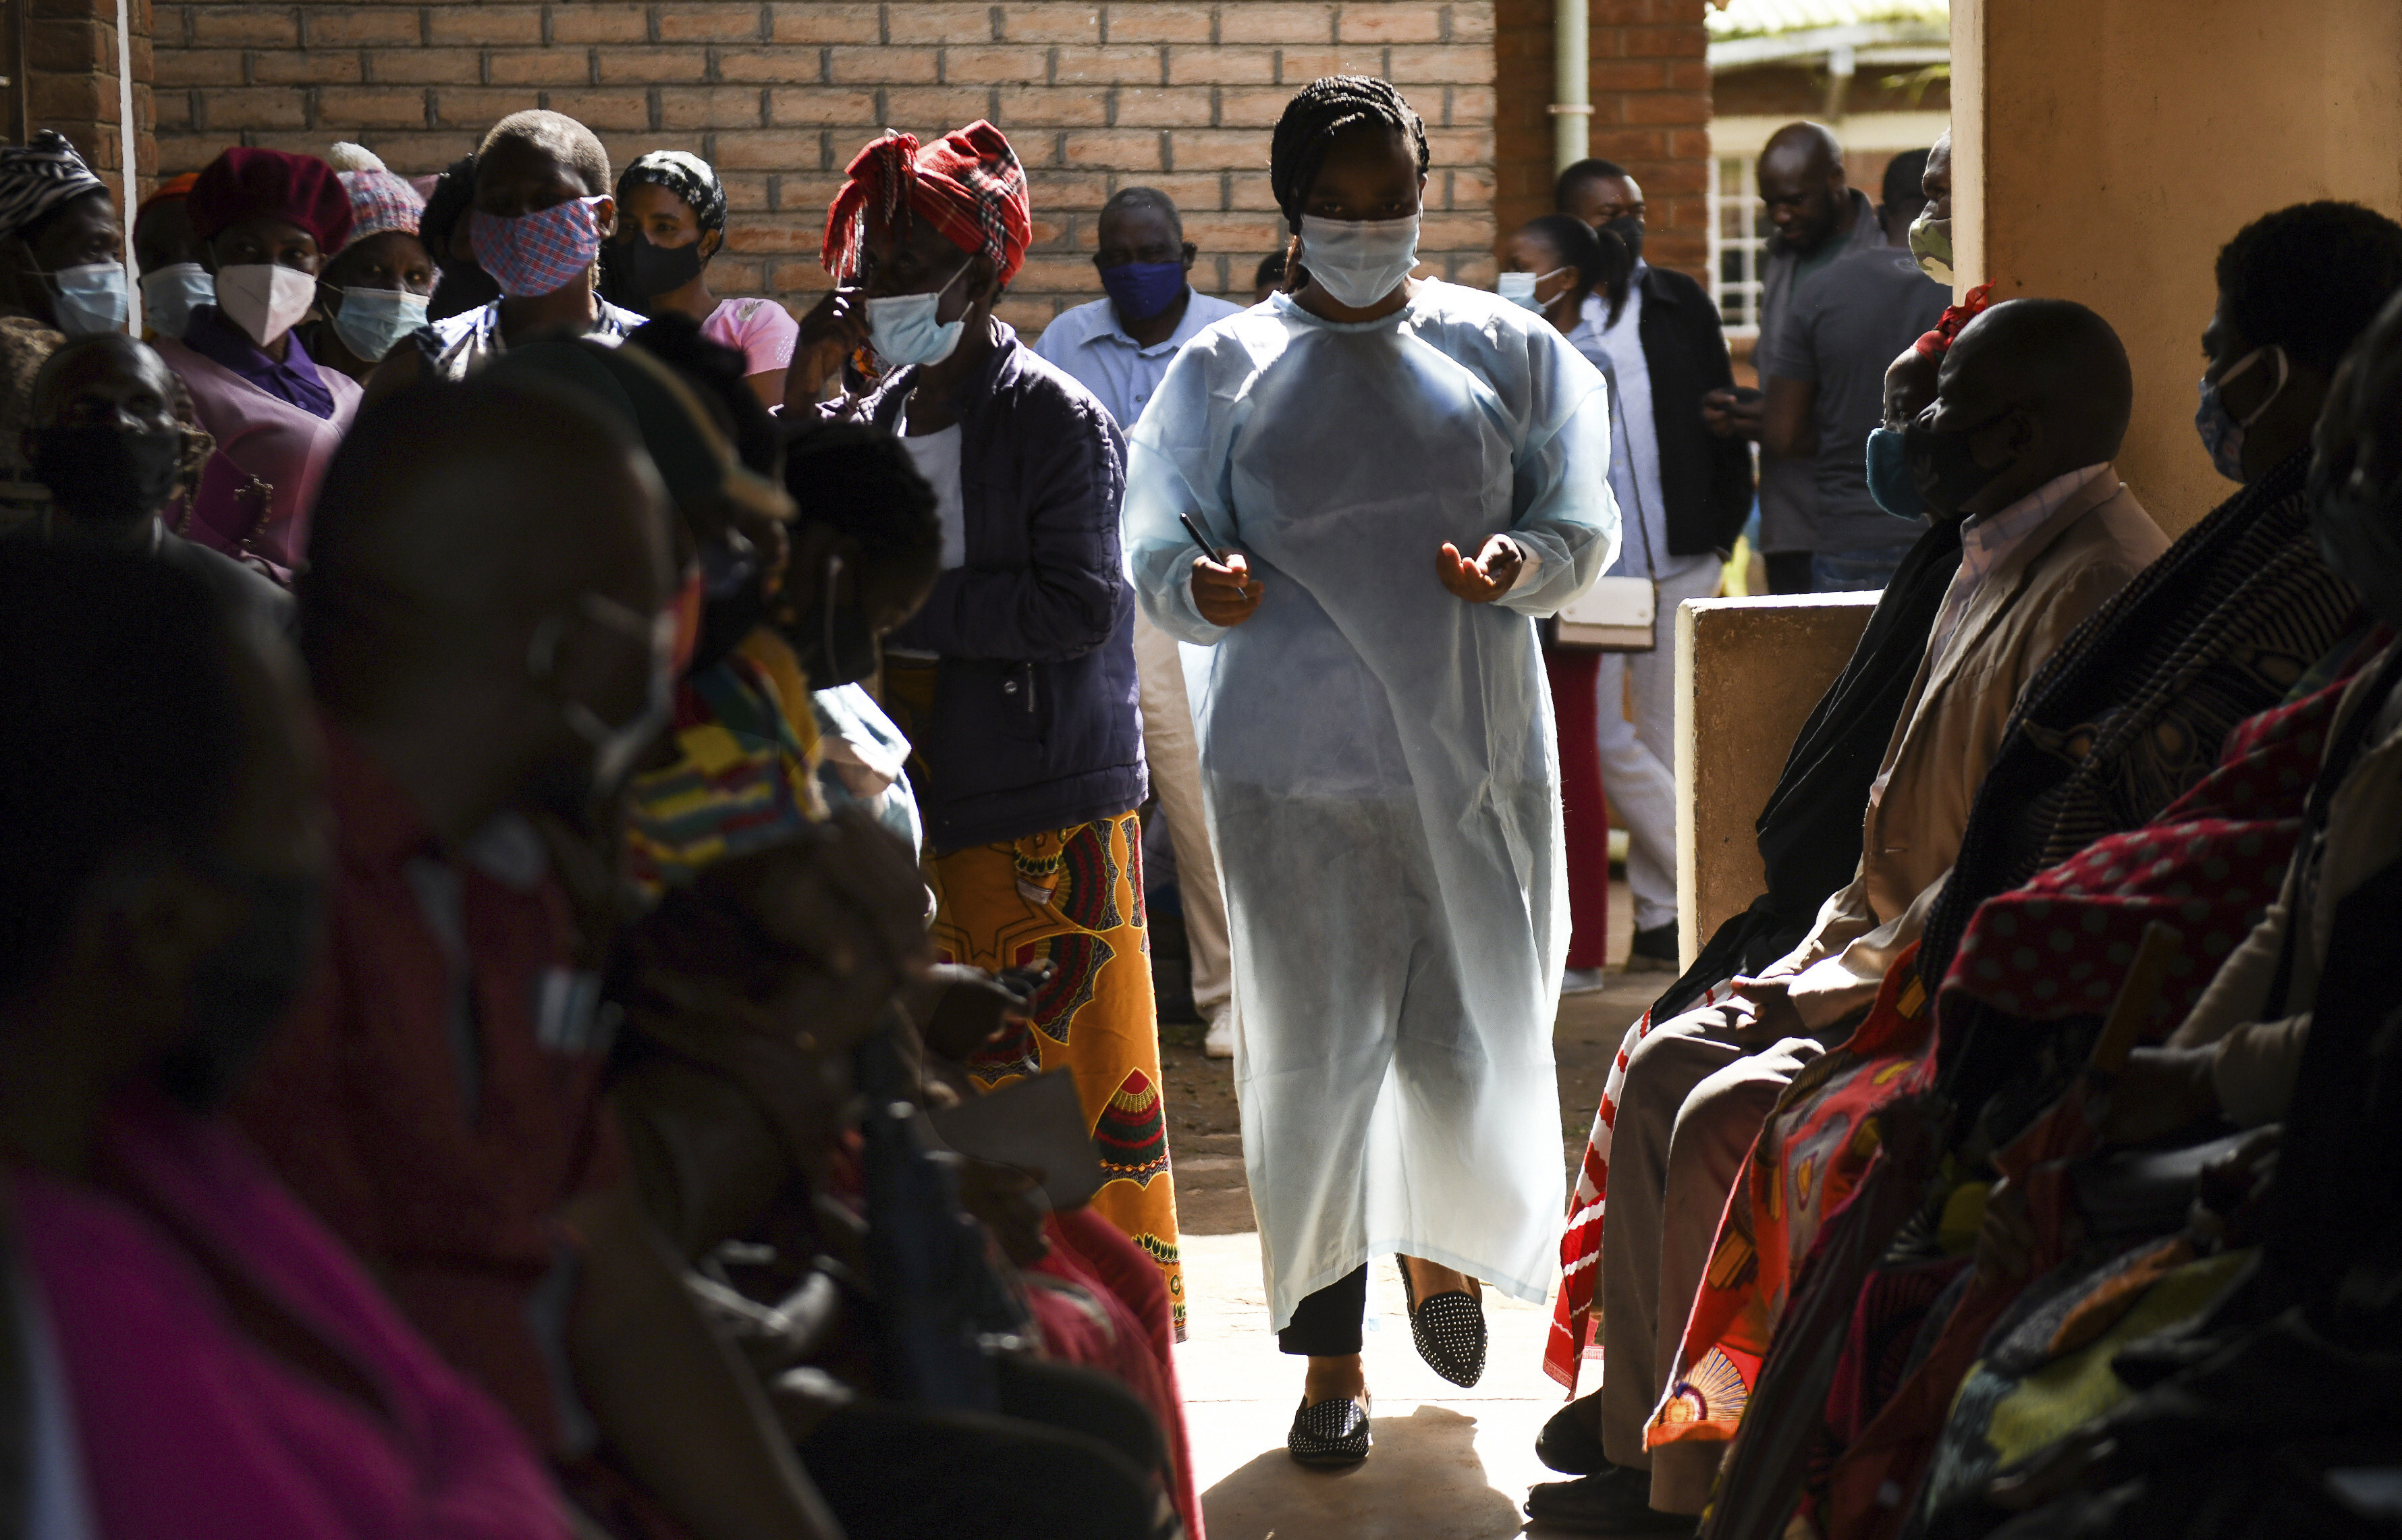 Numbers are handed out to people waiting to receive the AstraZeneca Covid -19 vaccine at a health centre in Blantyre, Malawi, on March 29. More than 90 per cent of Africa’s population has yet to be fully vaccinated against Covid-19. Photo: AP 